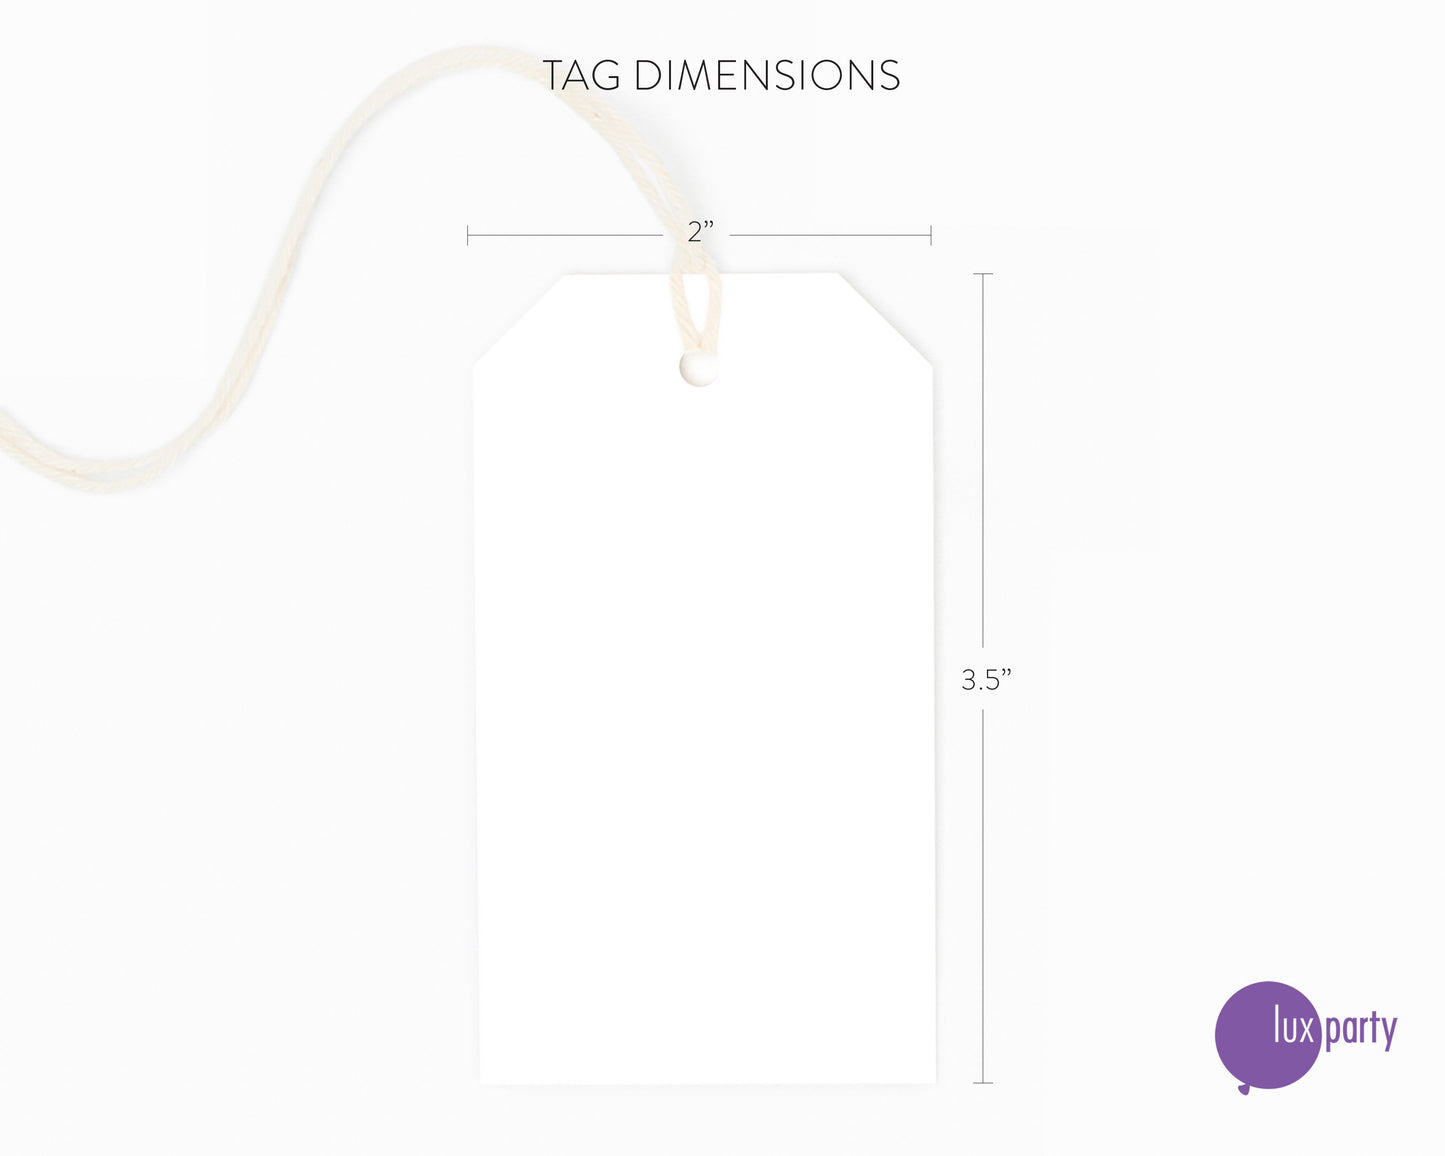 A blank white favor tag, with an off-white cotton string attached, showing the dimensions of the tag. Lux Party logo.